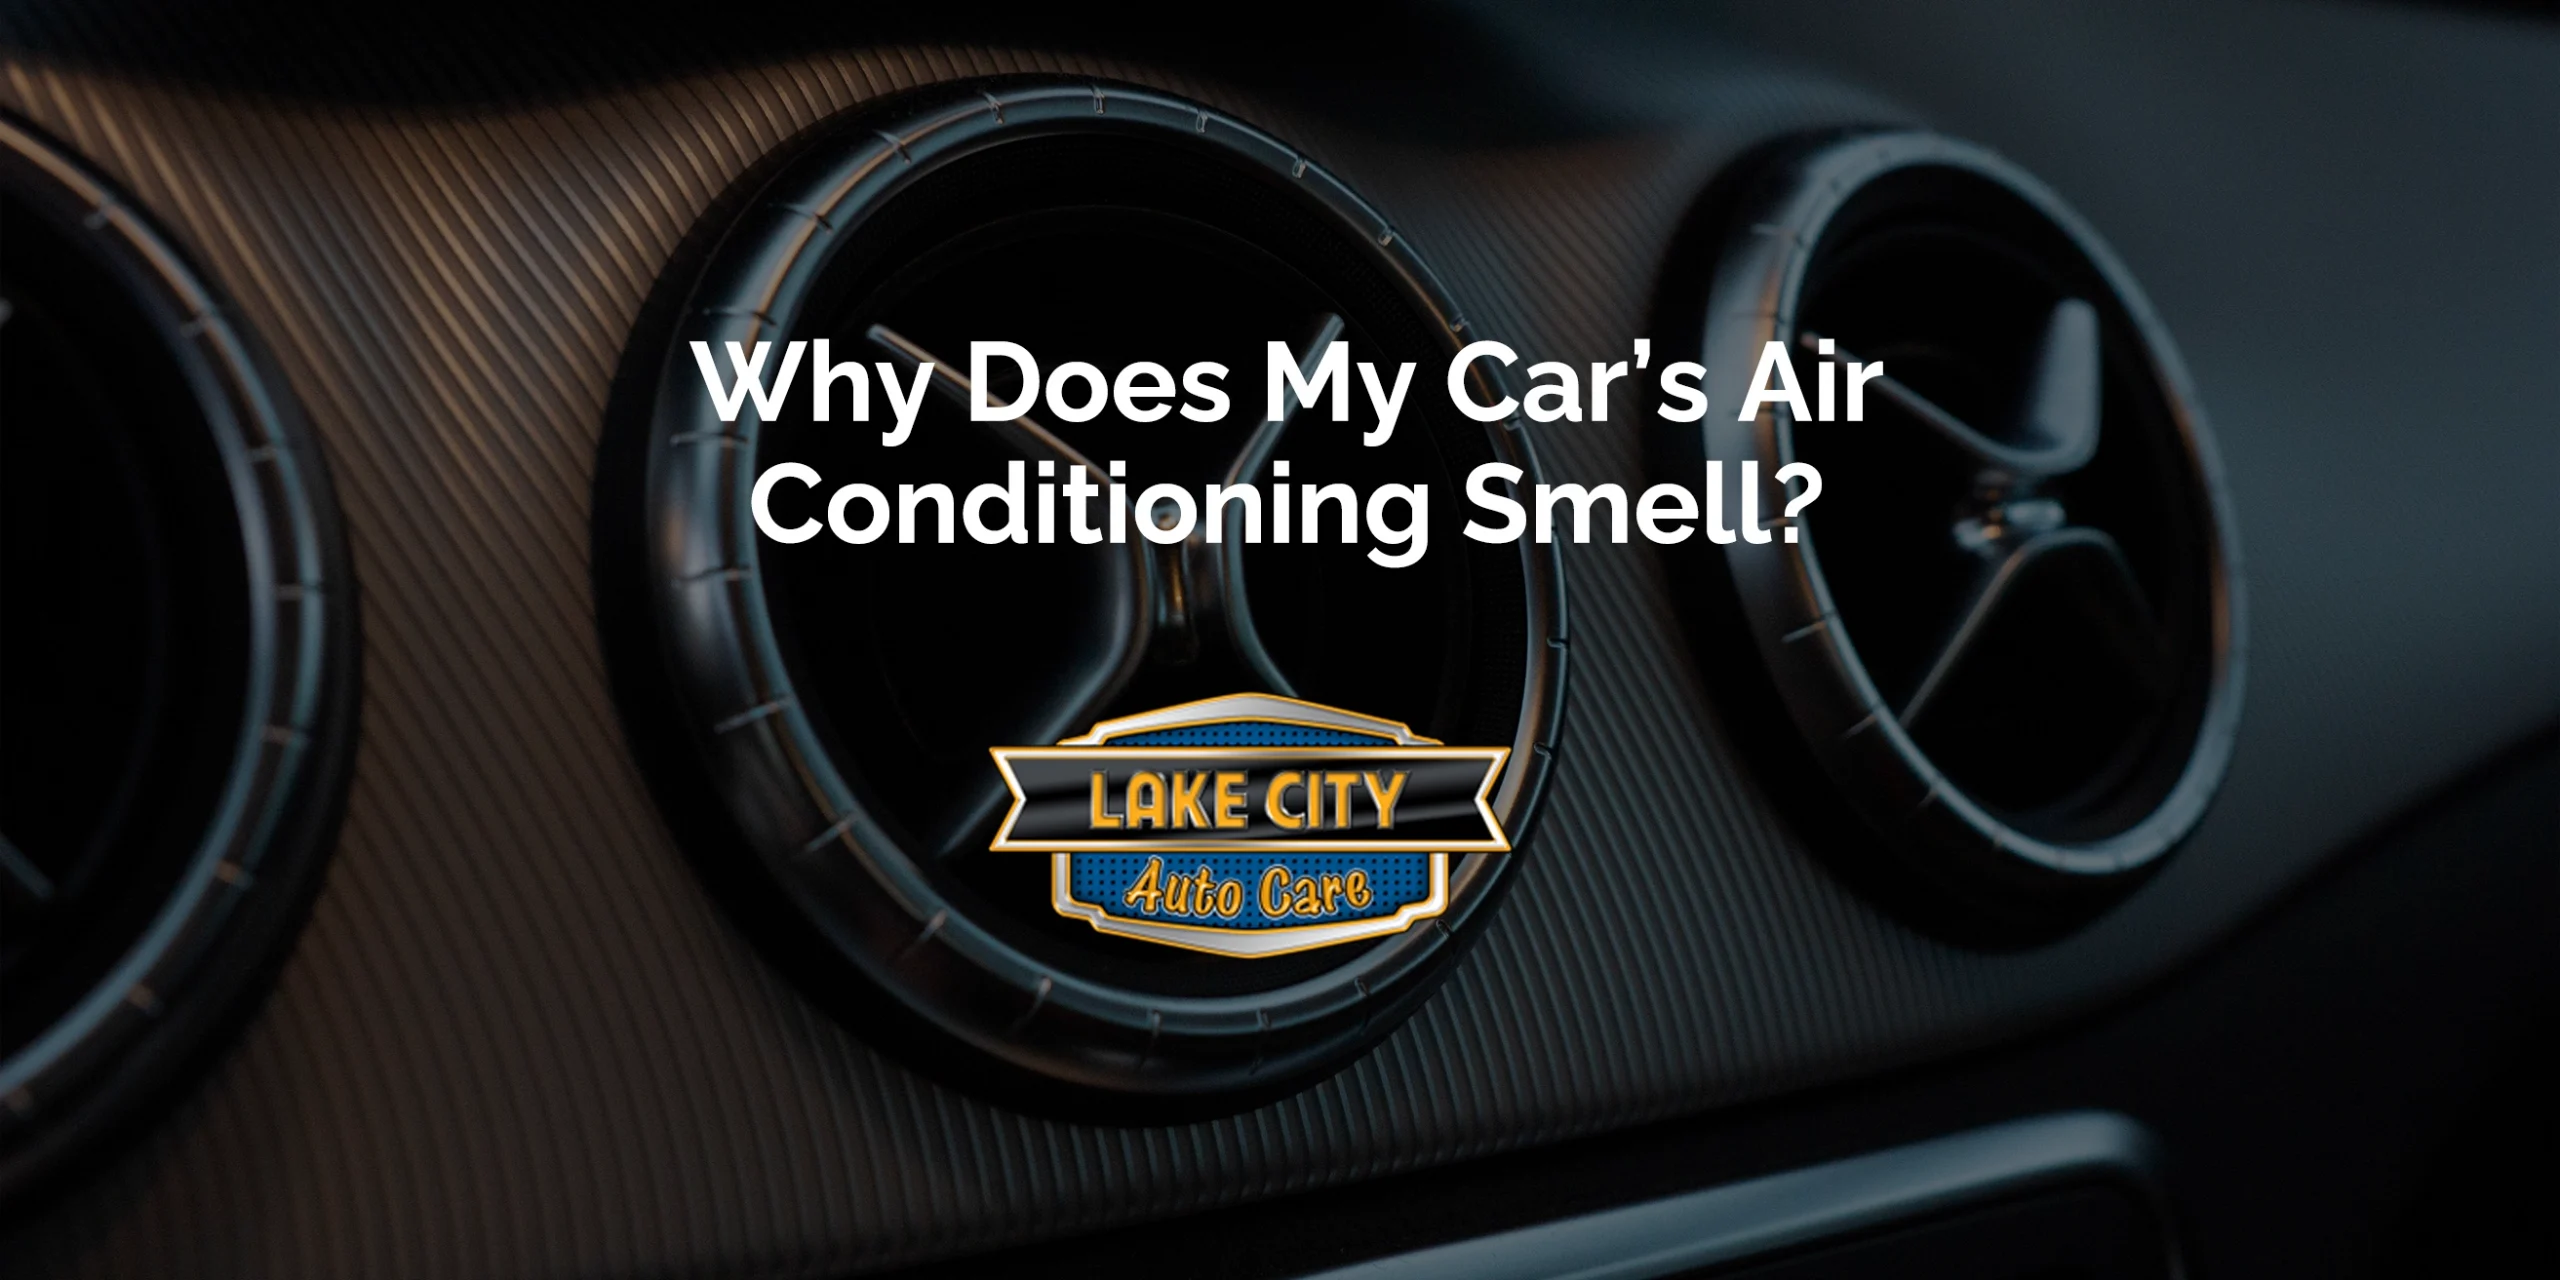 Why Does My Car’s Air Conditioning Smell?